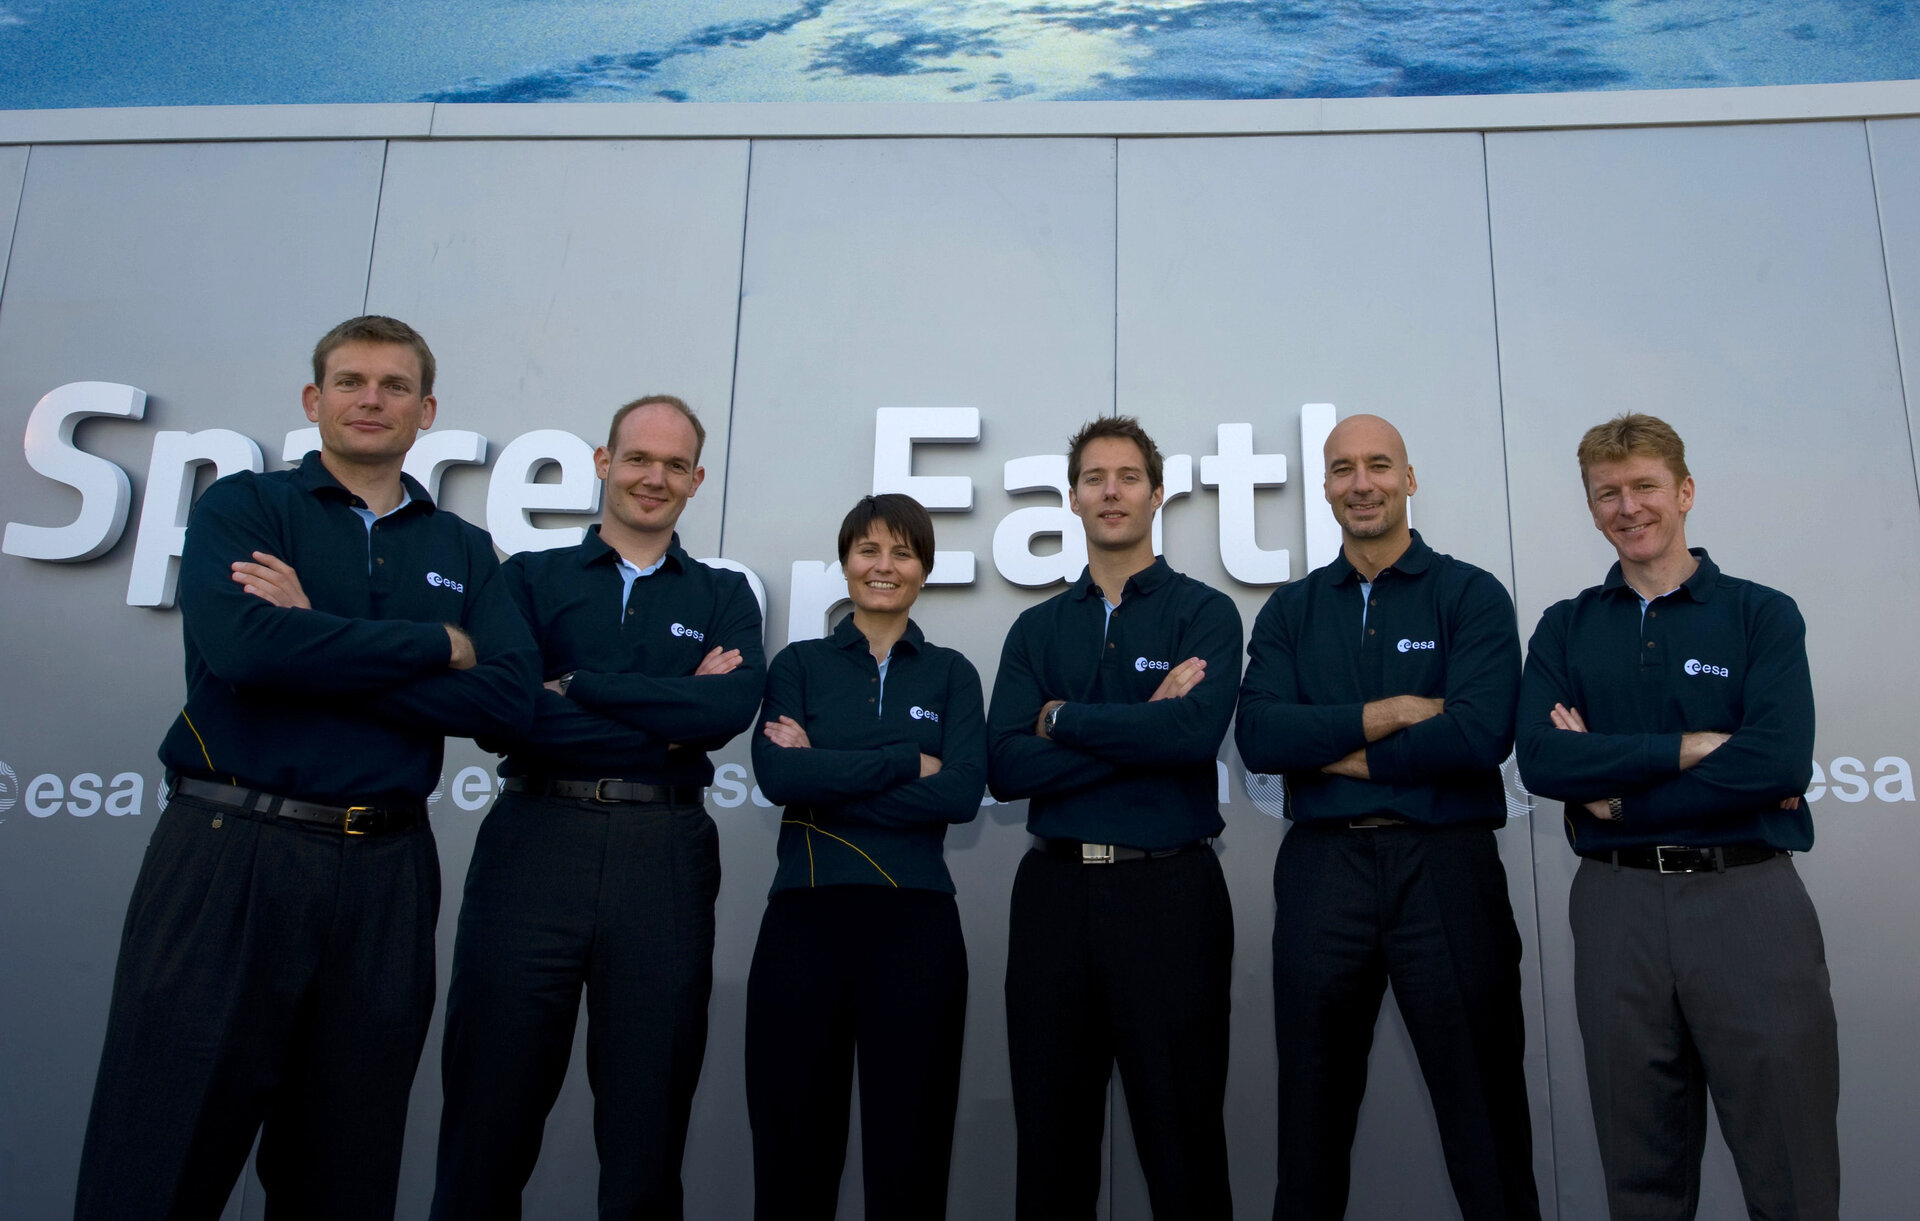 ESA astronauts at Le Bourget before the Human Spaceflight and Exploration in Europe conference